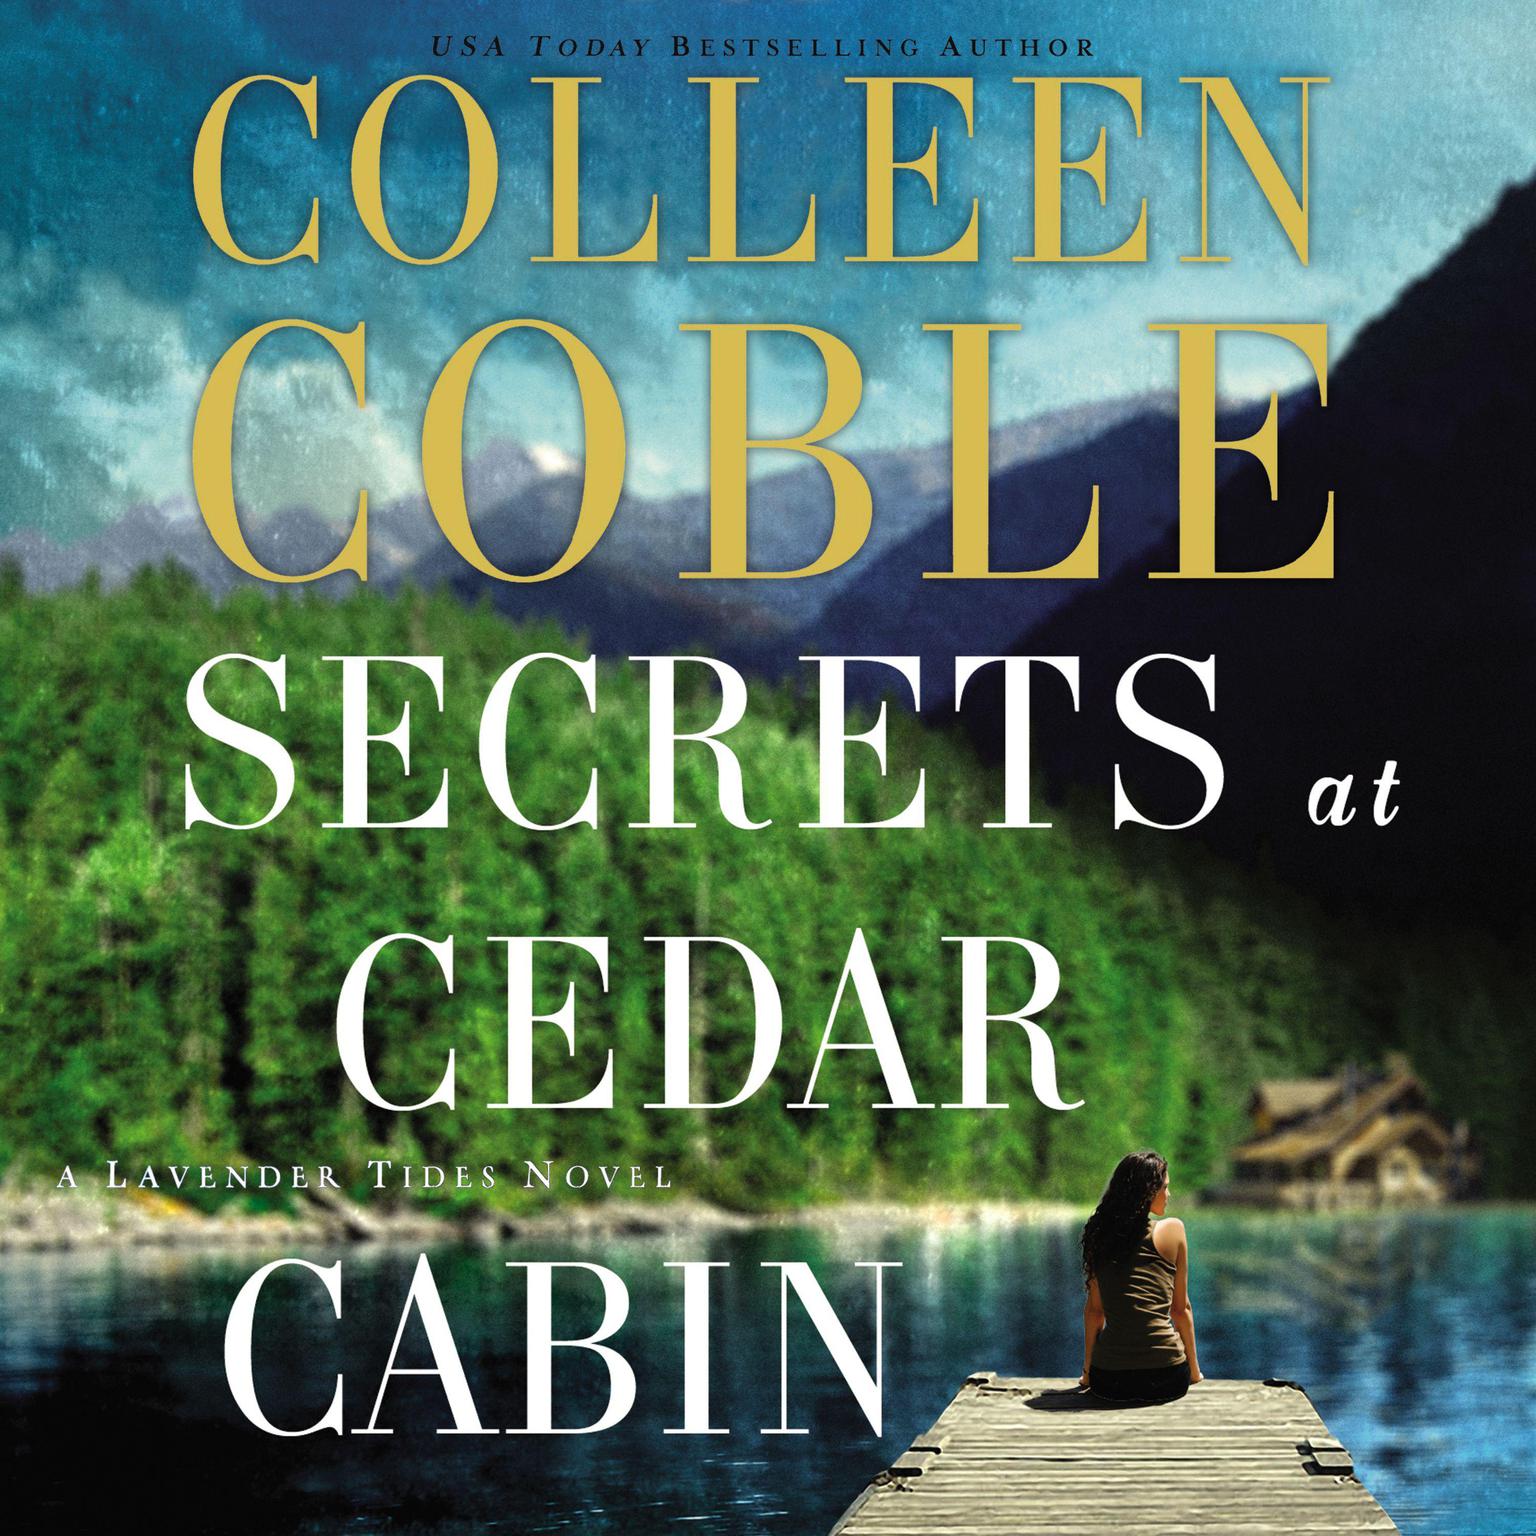 Secrets at Cedar Cabin Audiobook, by Colleen Coble